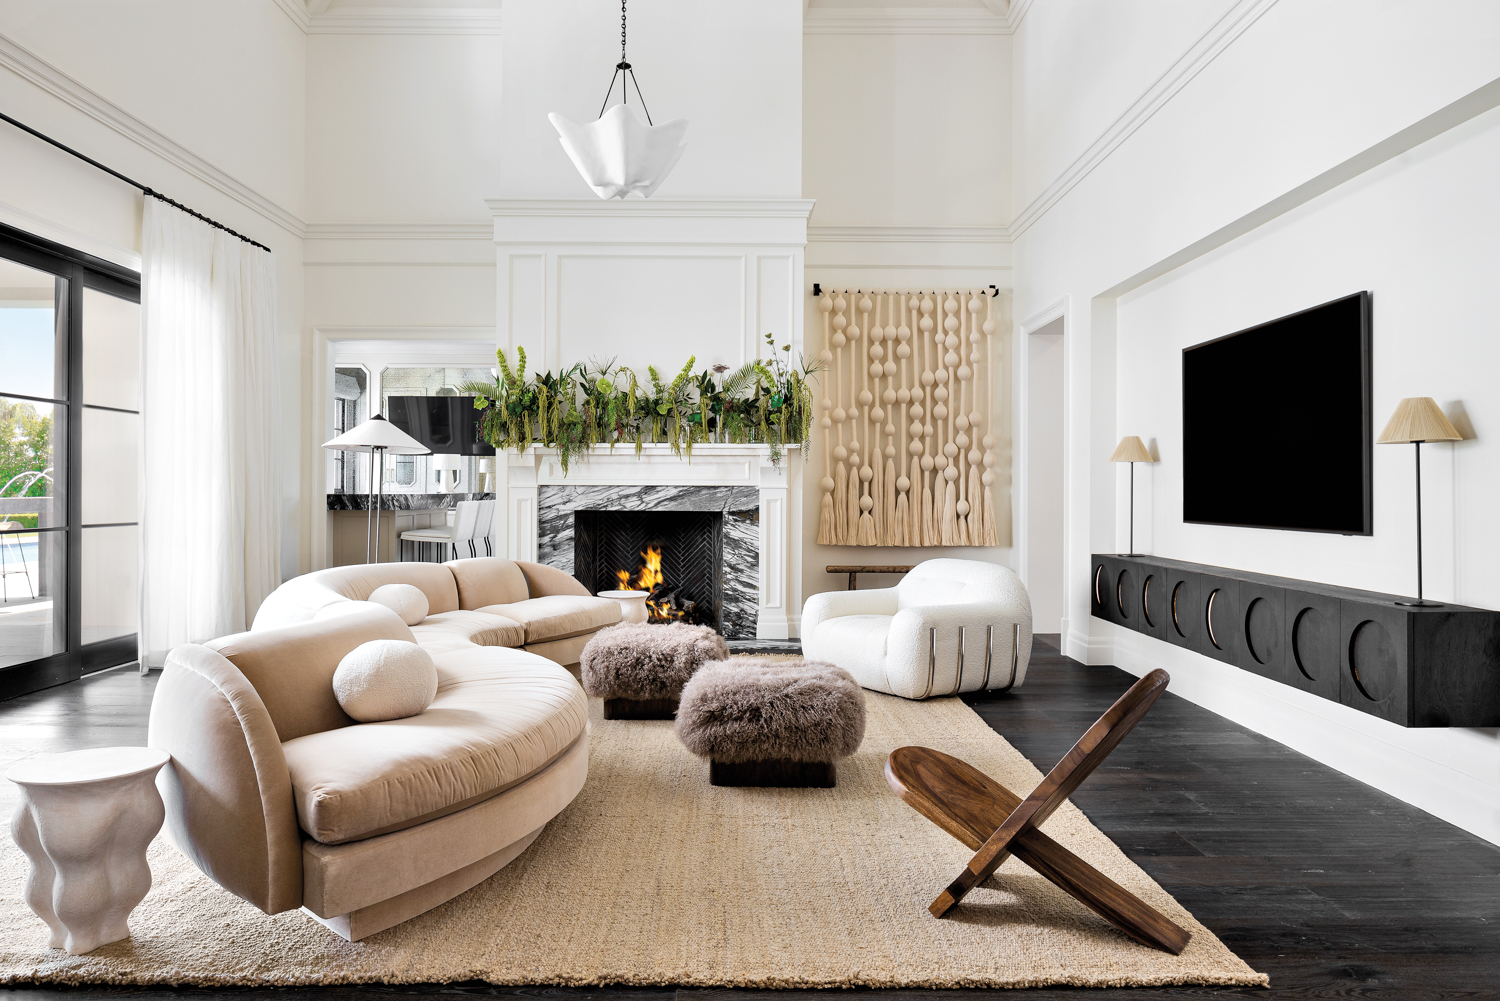 A living room with a serpentine sofa, fur ottomans and a white boucle chair.